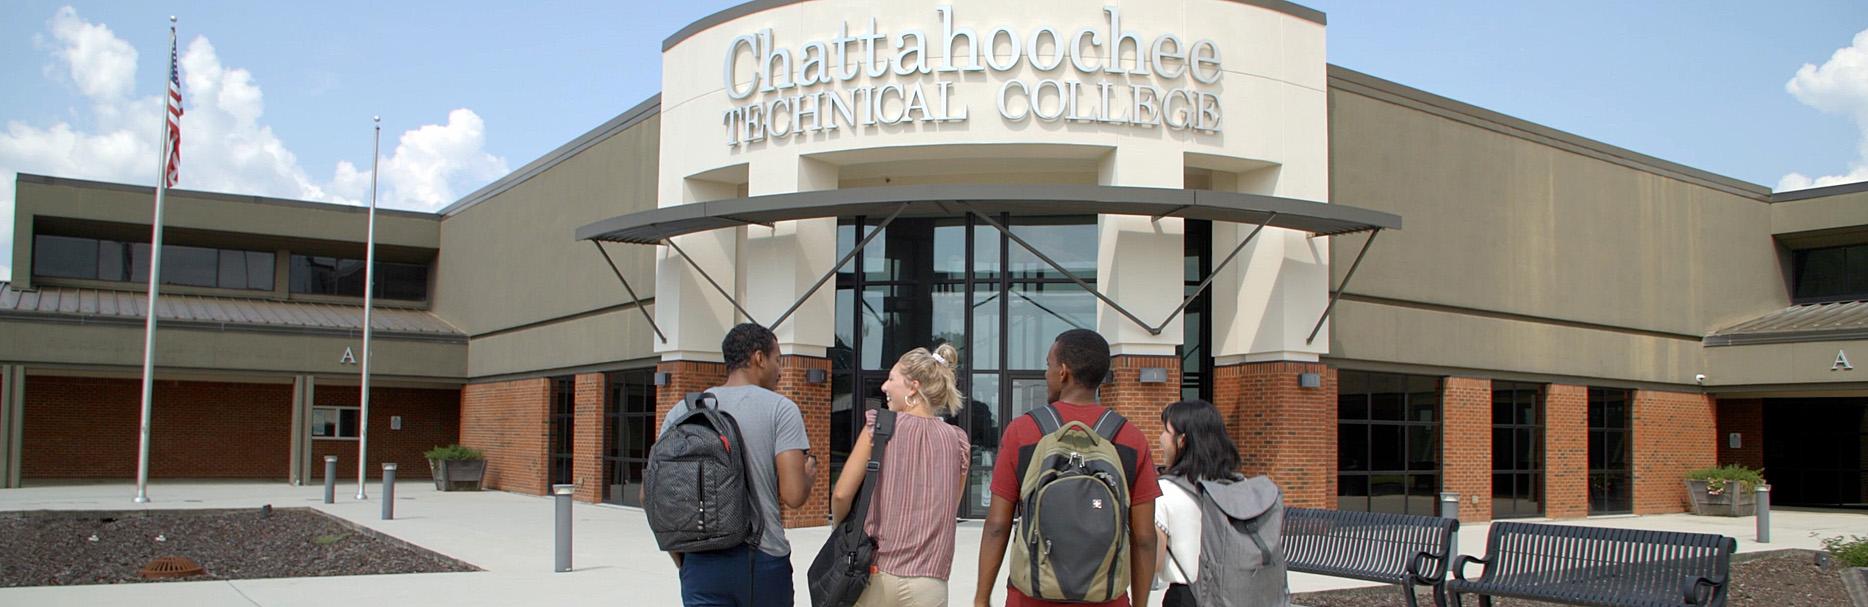 Students walking to front doors of Chattahoochee Technical College